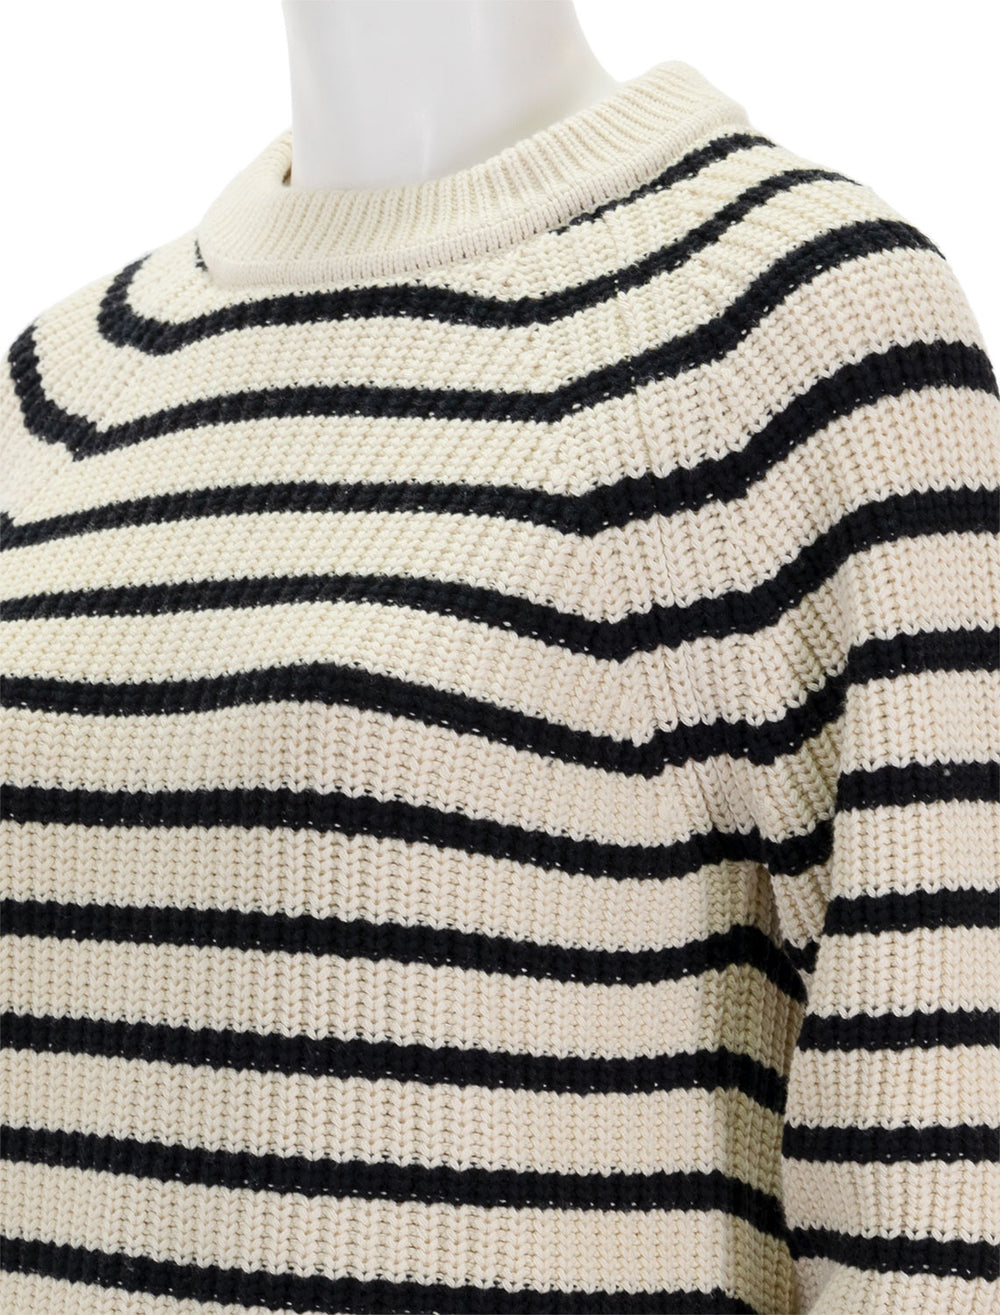 Close-up view of Alex Mill's Amalie Pullover Sweater in Ivory and Black Stripe.